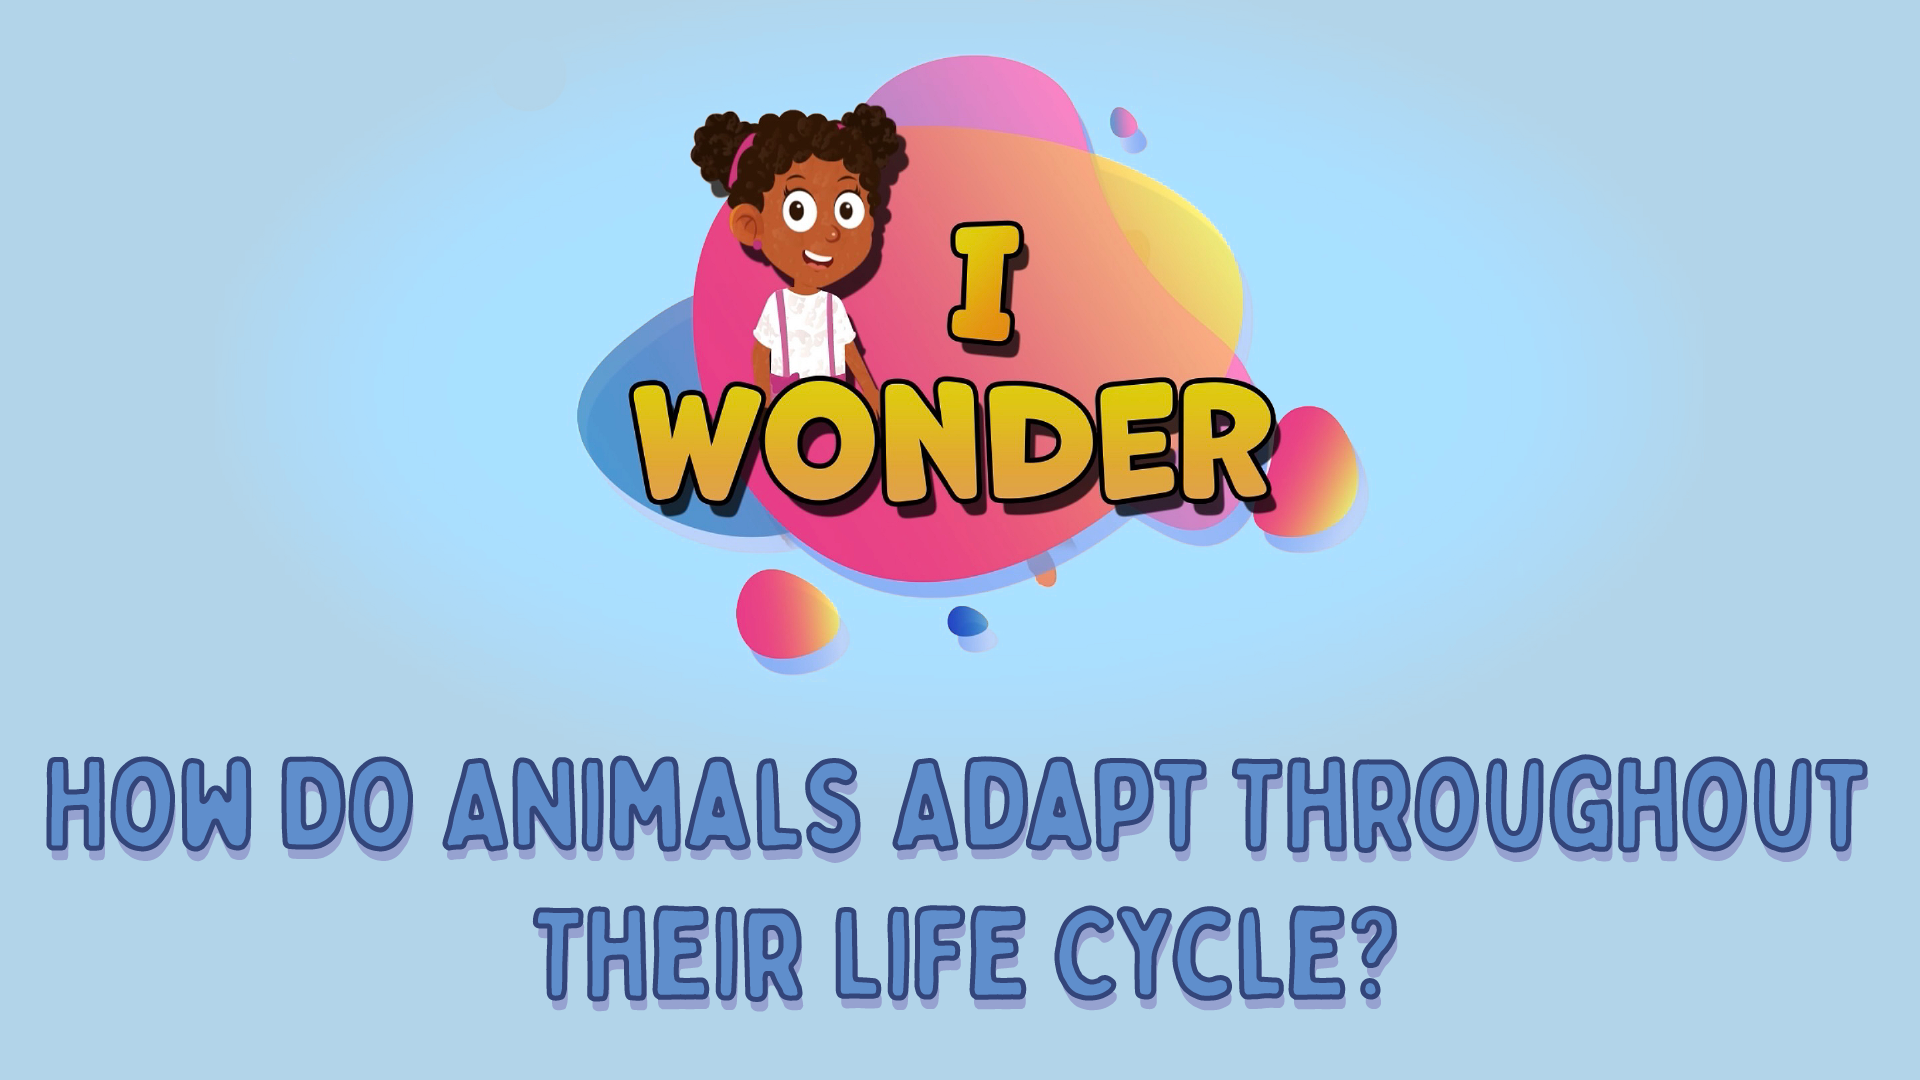 How Do Animals Adapt Throughout Their Life Cycle?